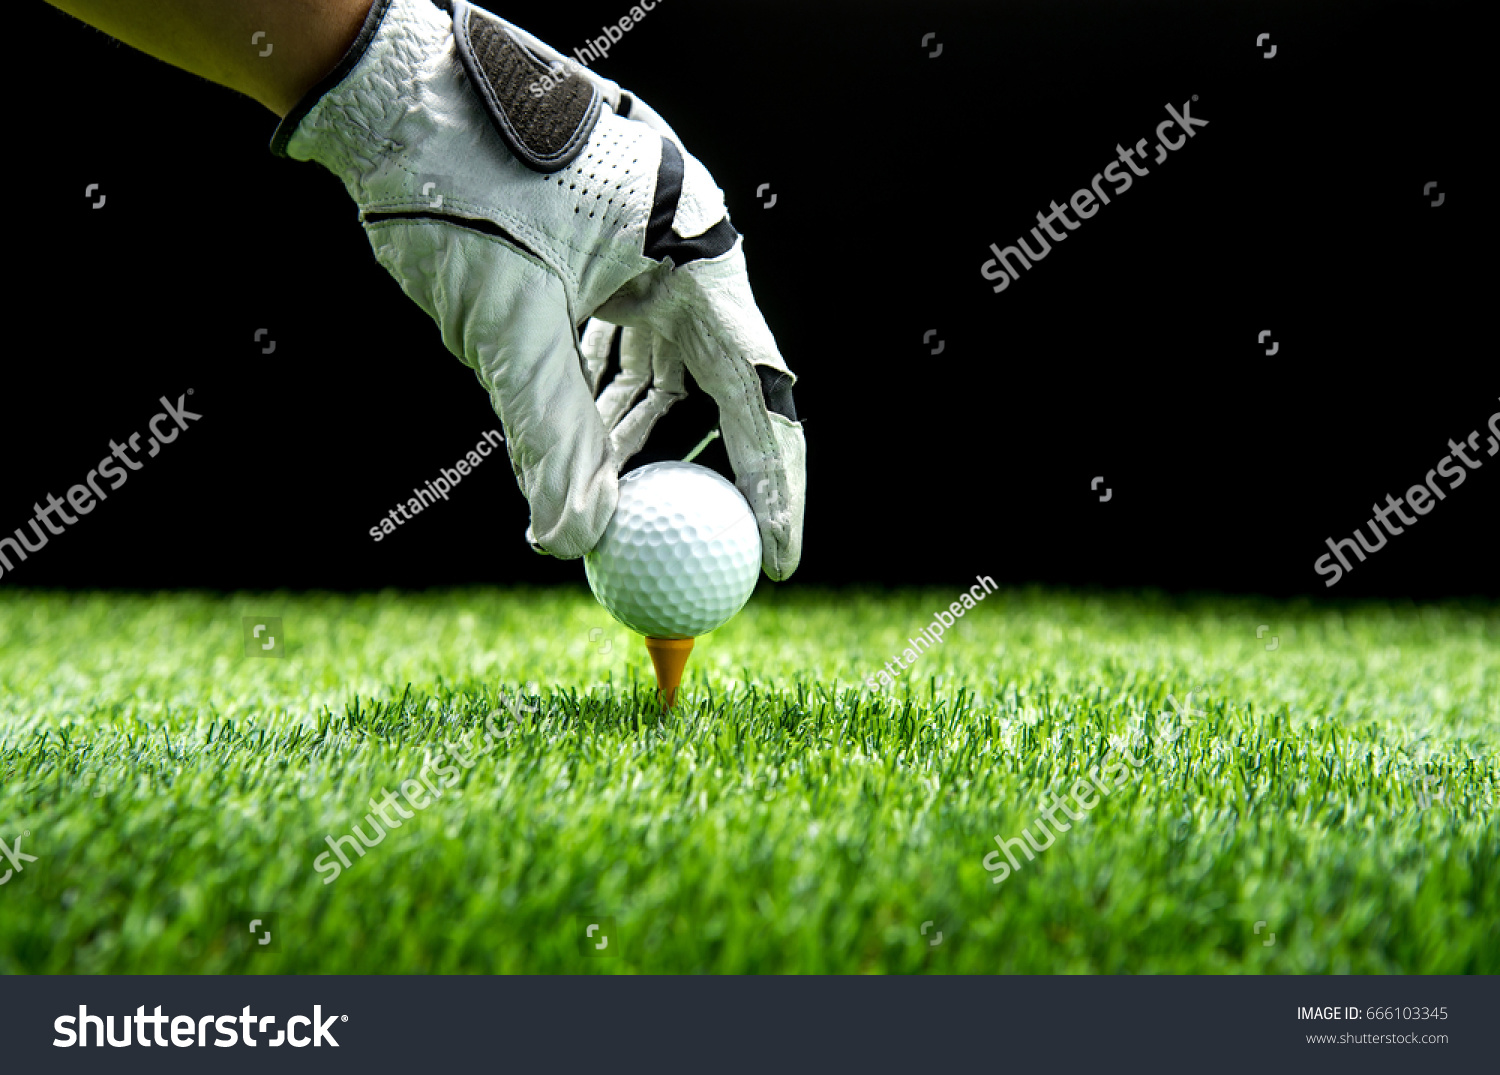 Hand Ware Leather Glove Putting Golf Stock Photo 666103345 